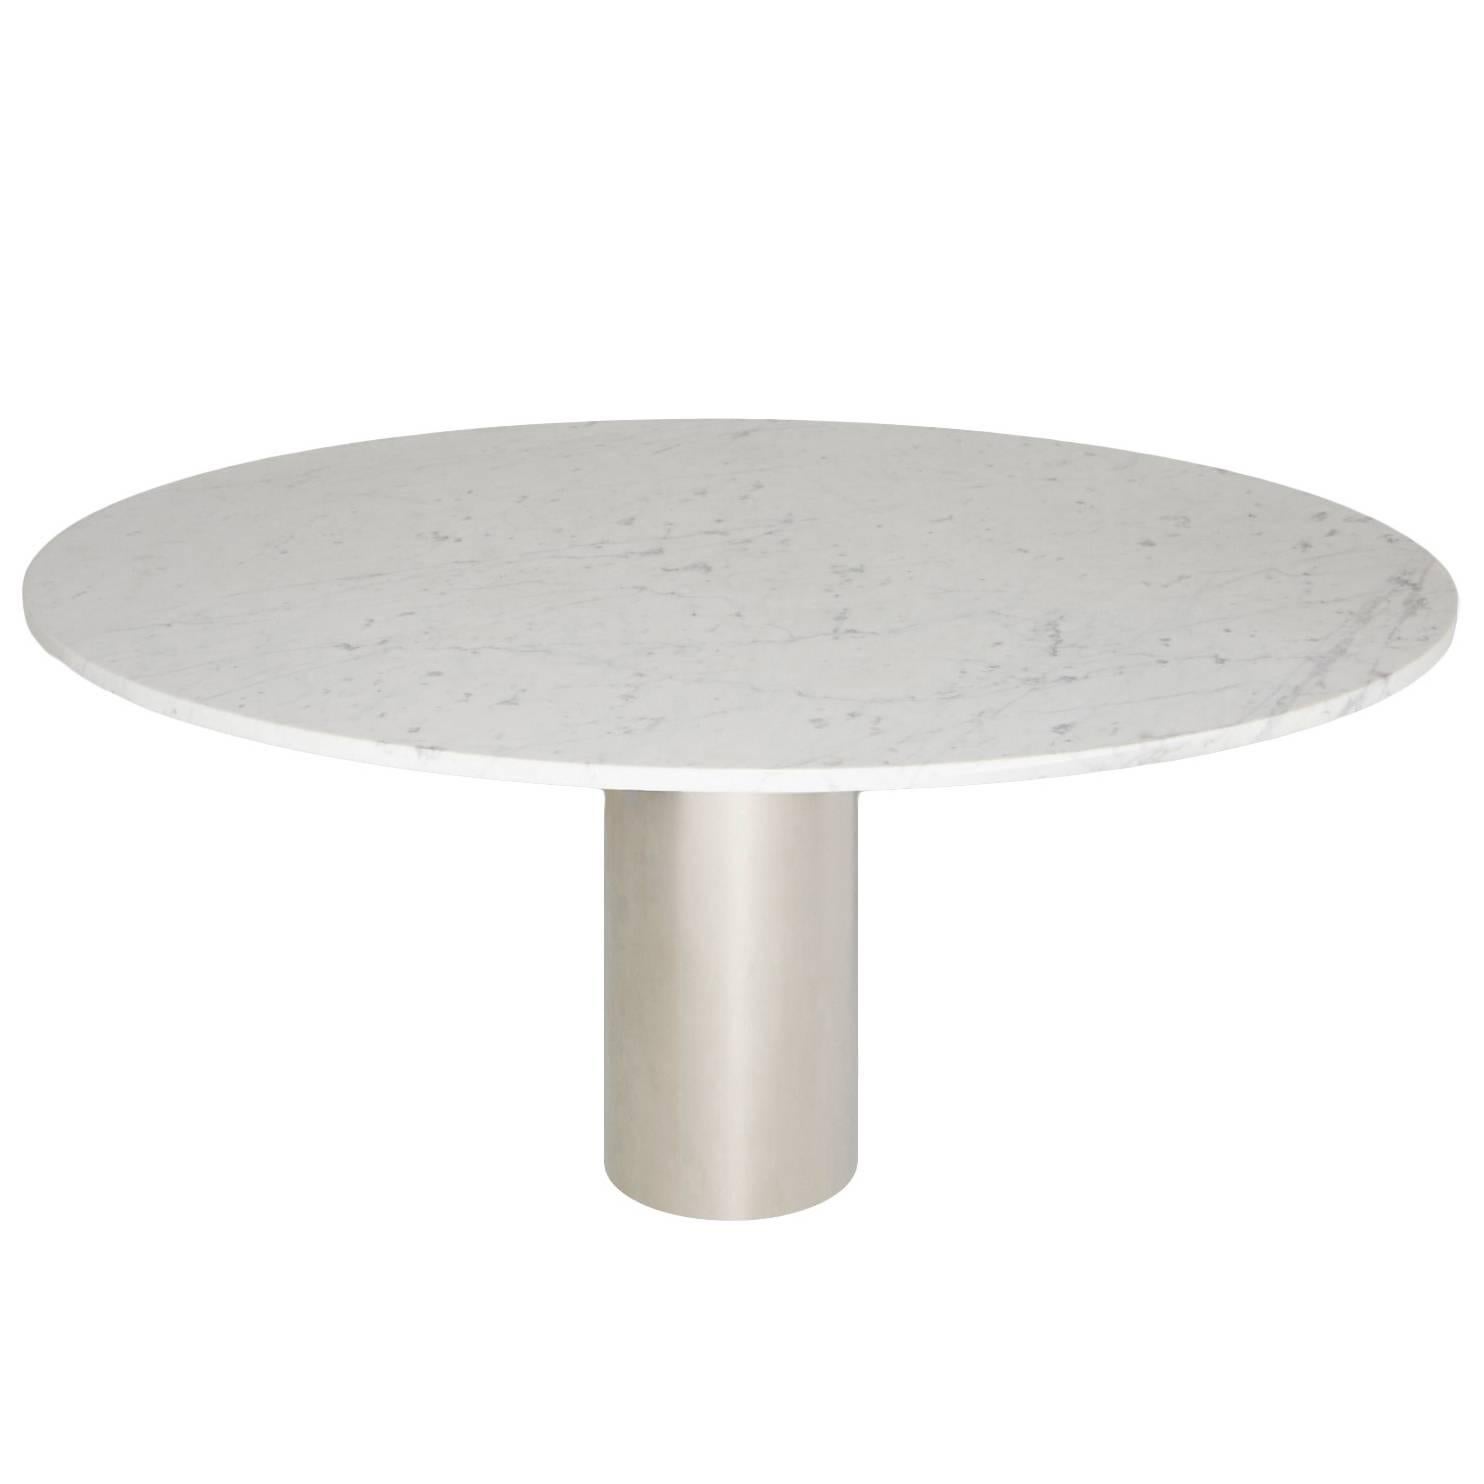 Monumental White Marble Pedestal Dining Table by Brueton